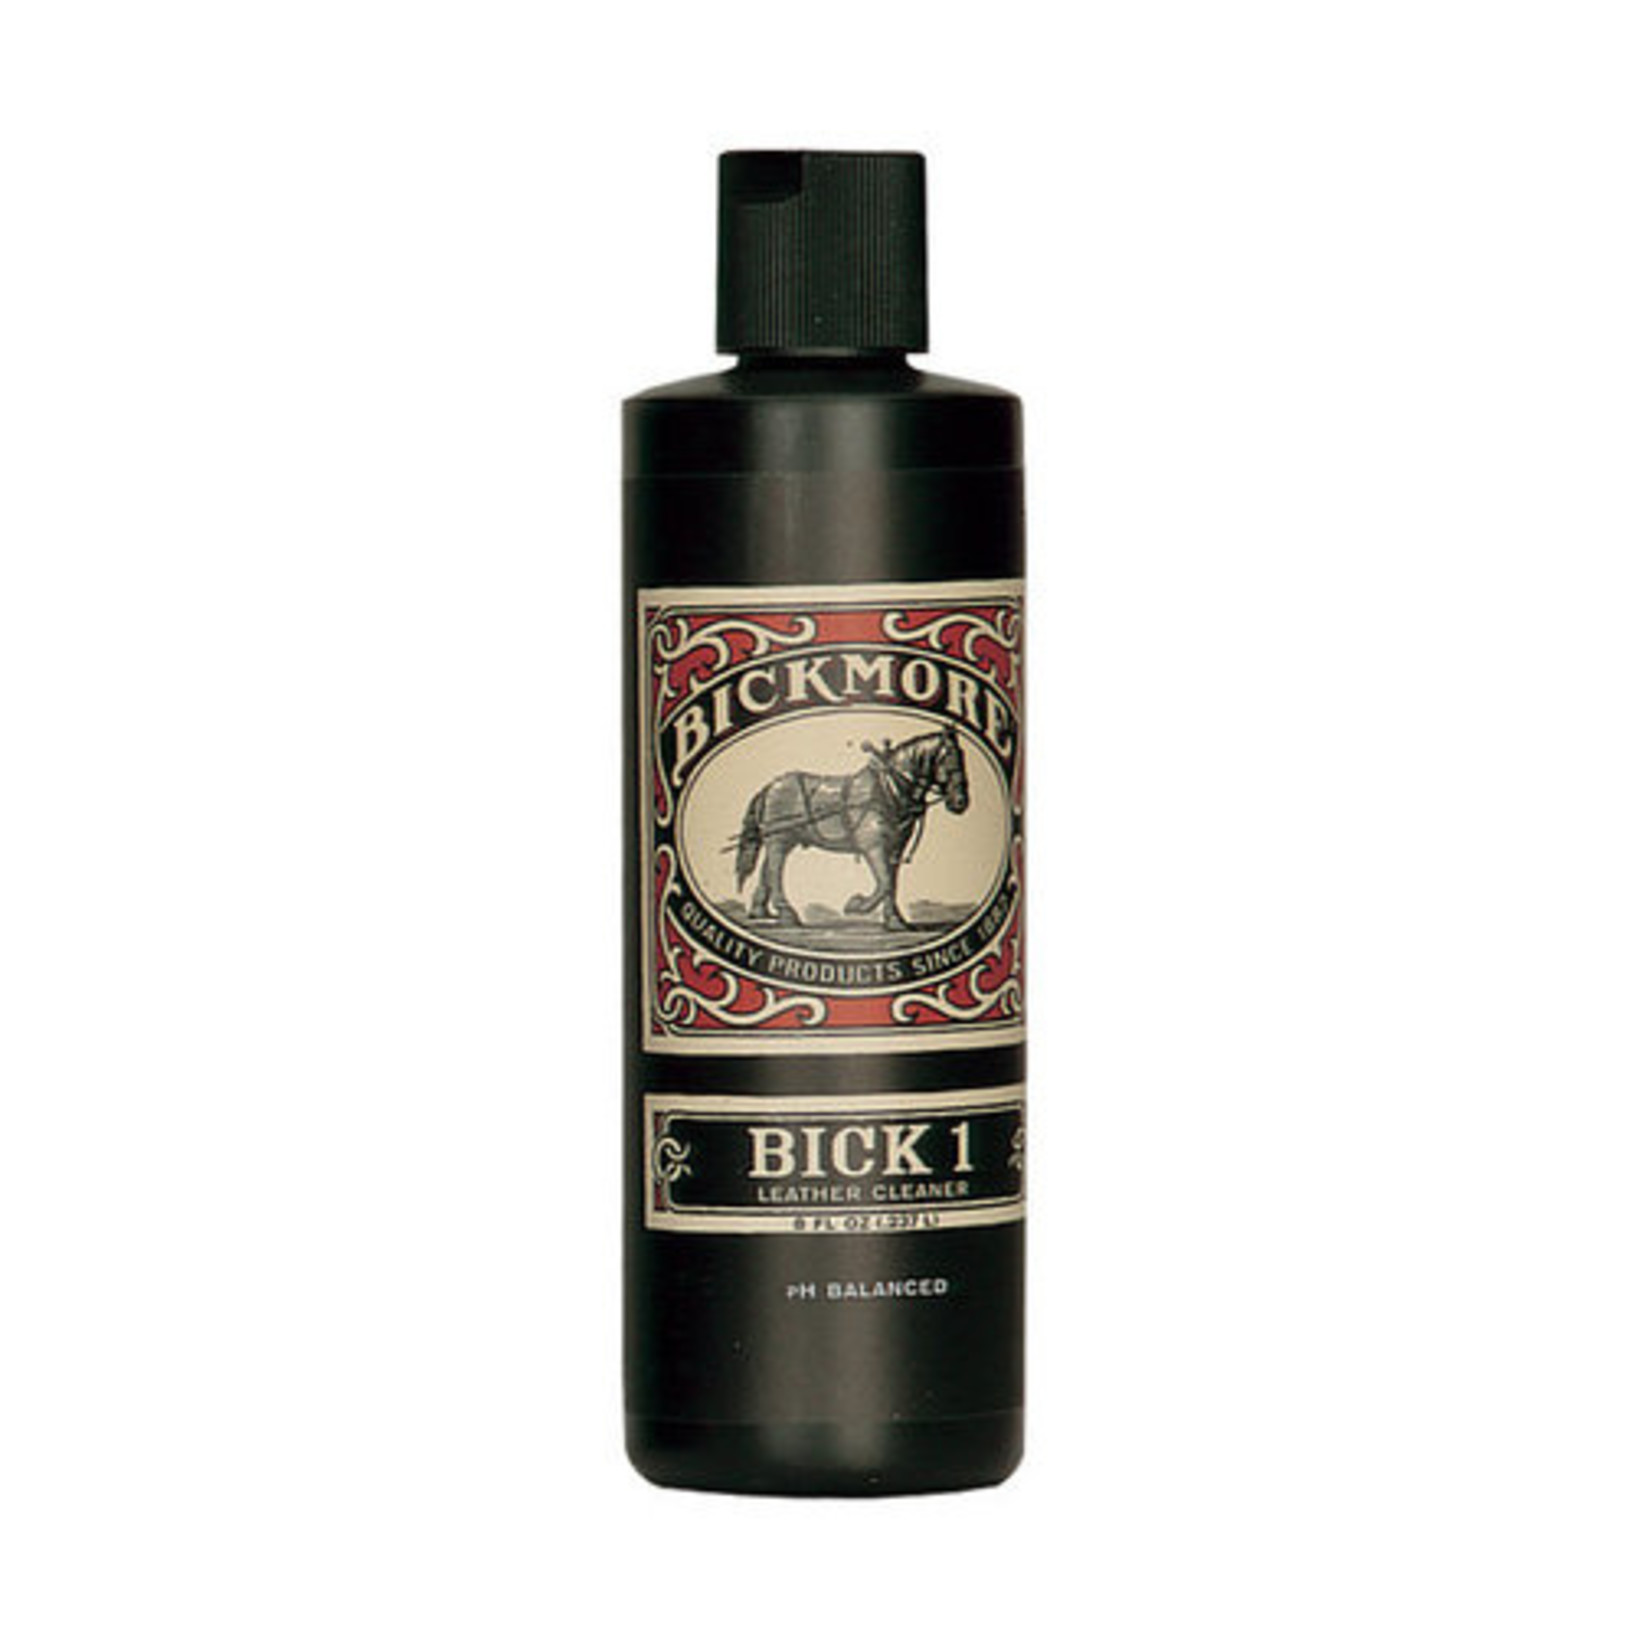 Bick-1 Leather Cleaner